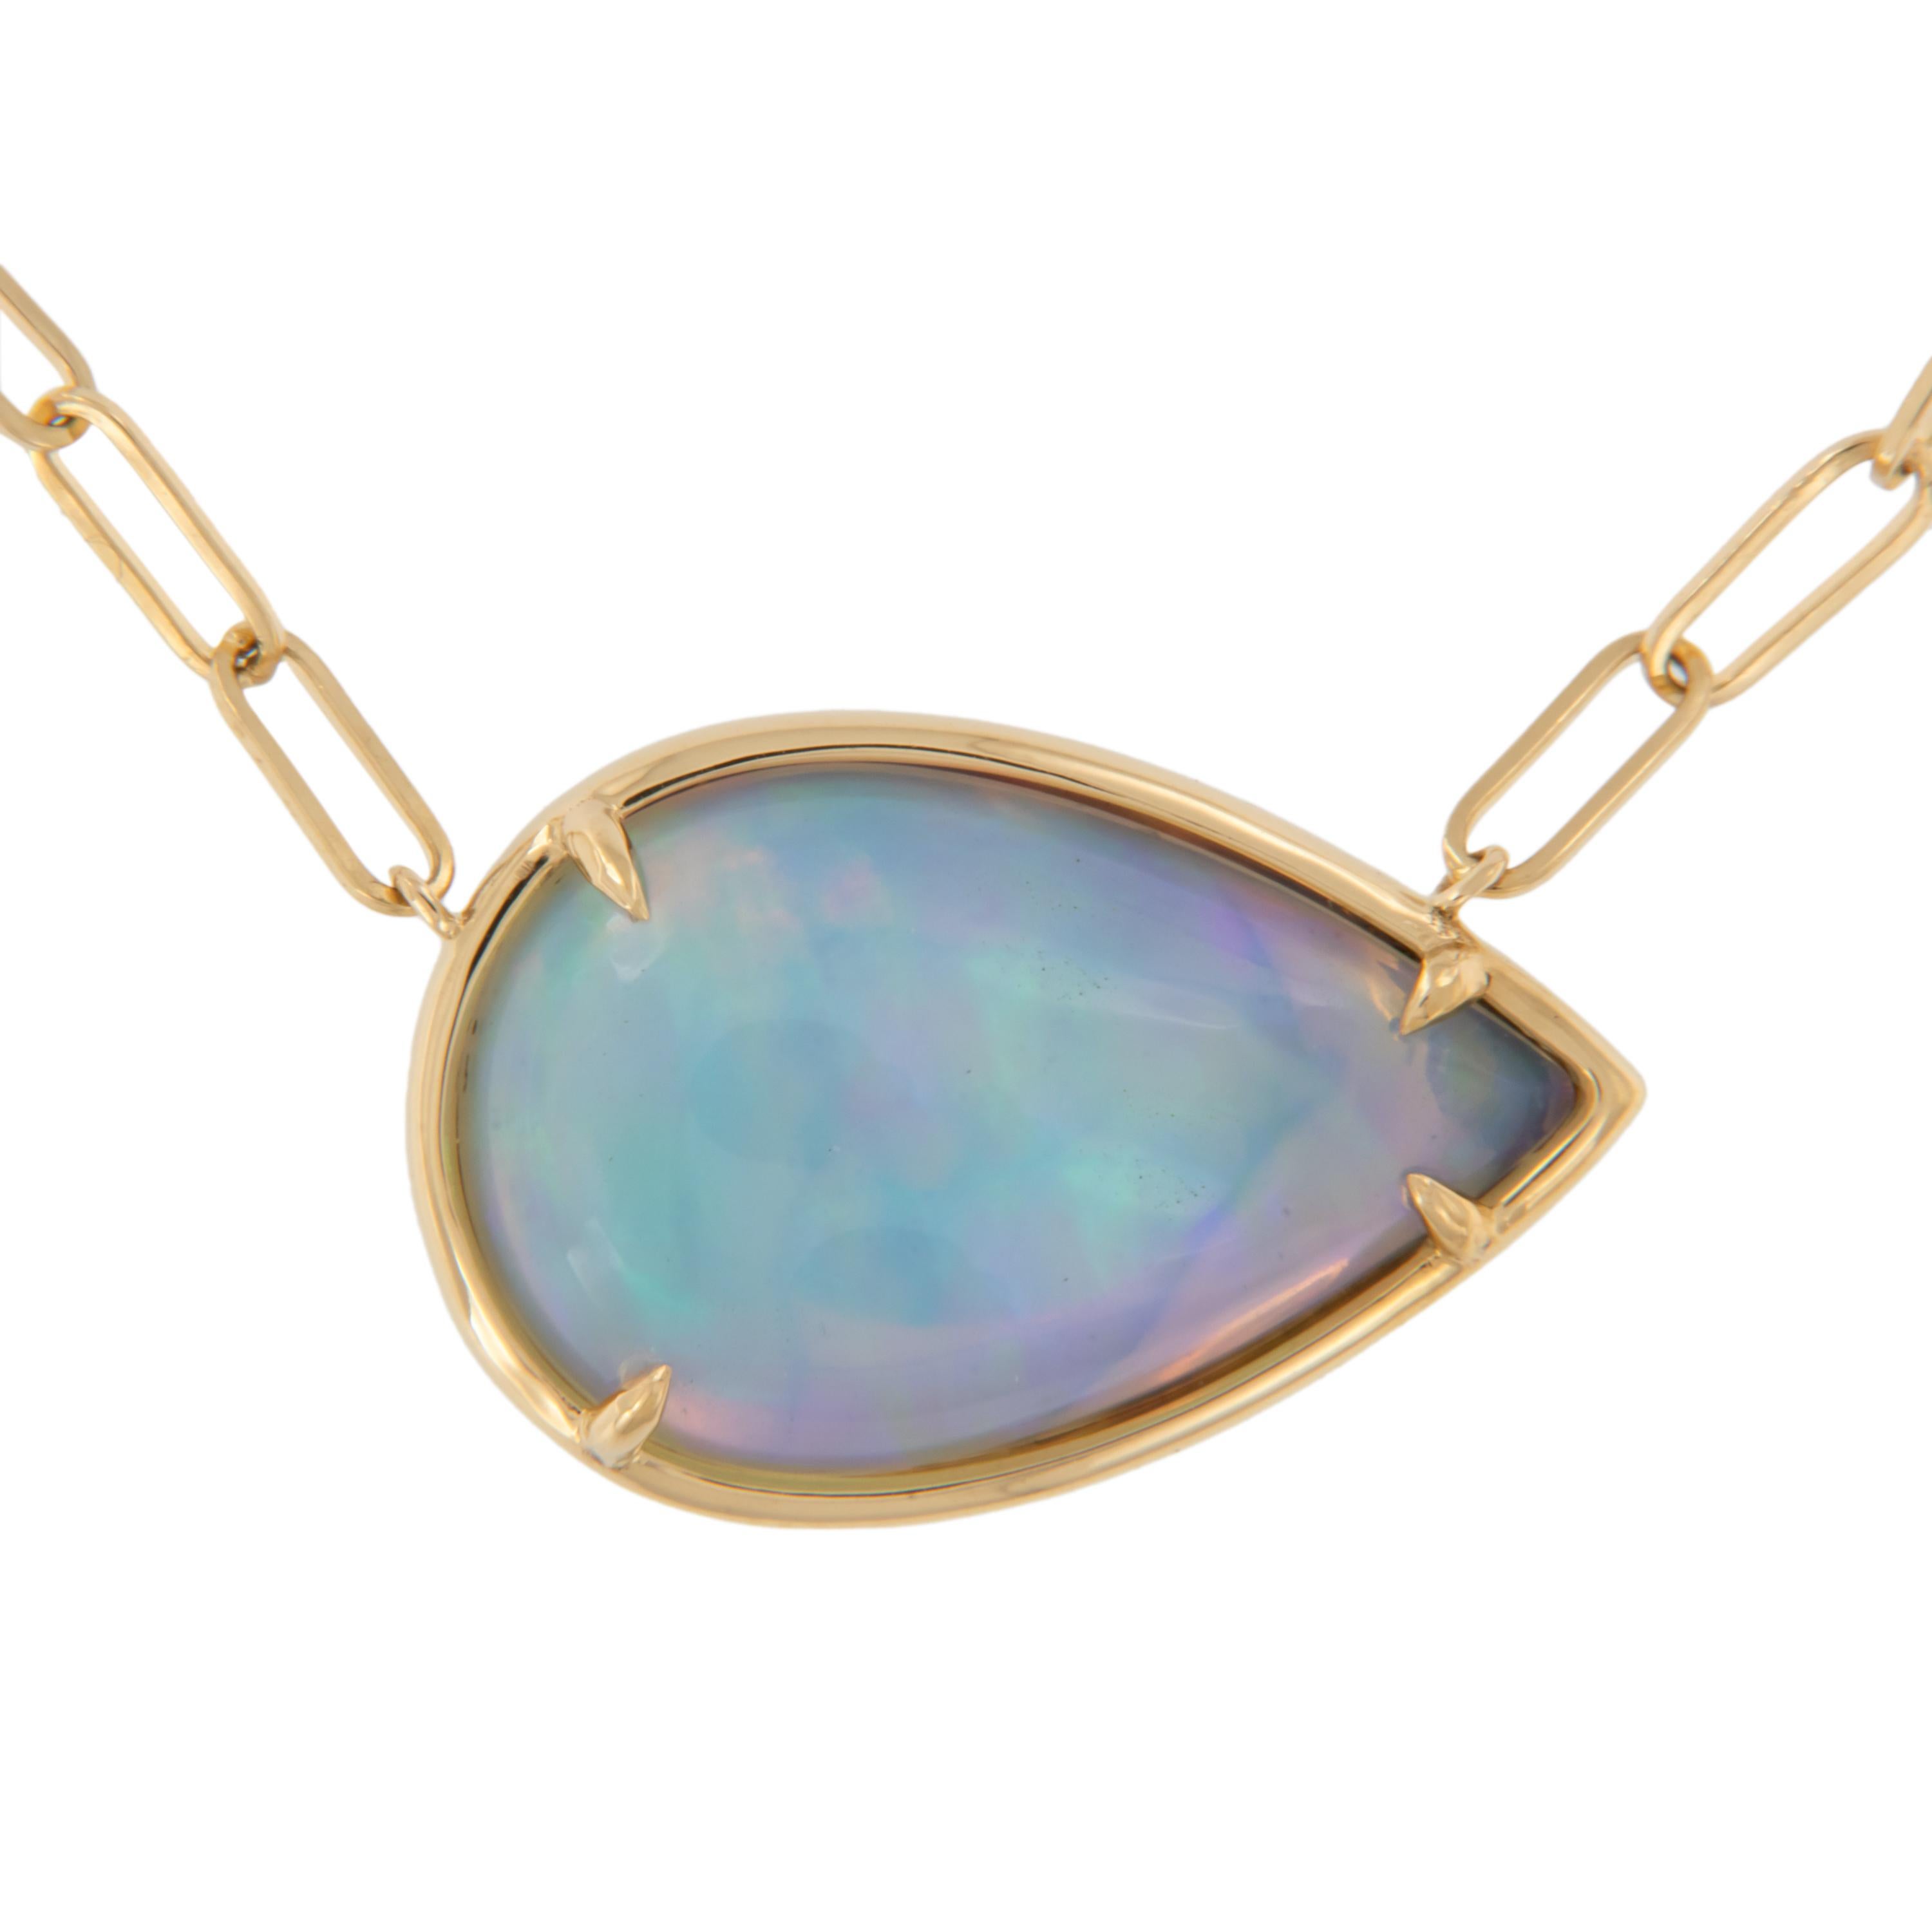 Breathtaking jelly opal with beautiful blue & green play of colors takes center stage in this solitaire necklace with a spin - the pear shaped cabochon opal is set horizontal for a classic yet unique look! Crafted from rich 18 karat yellow gold and